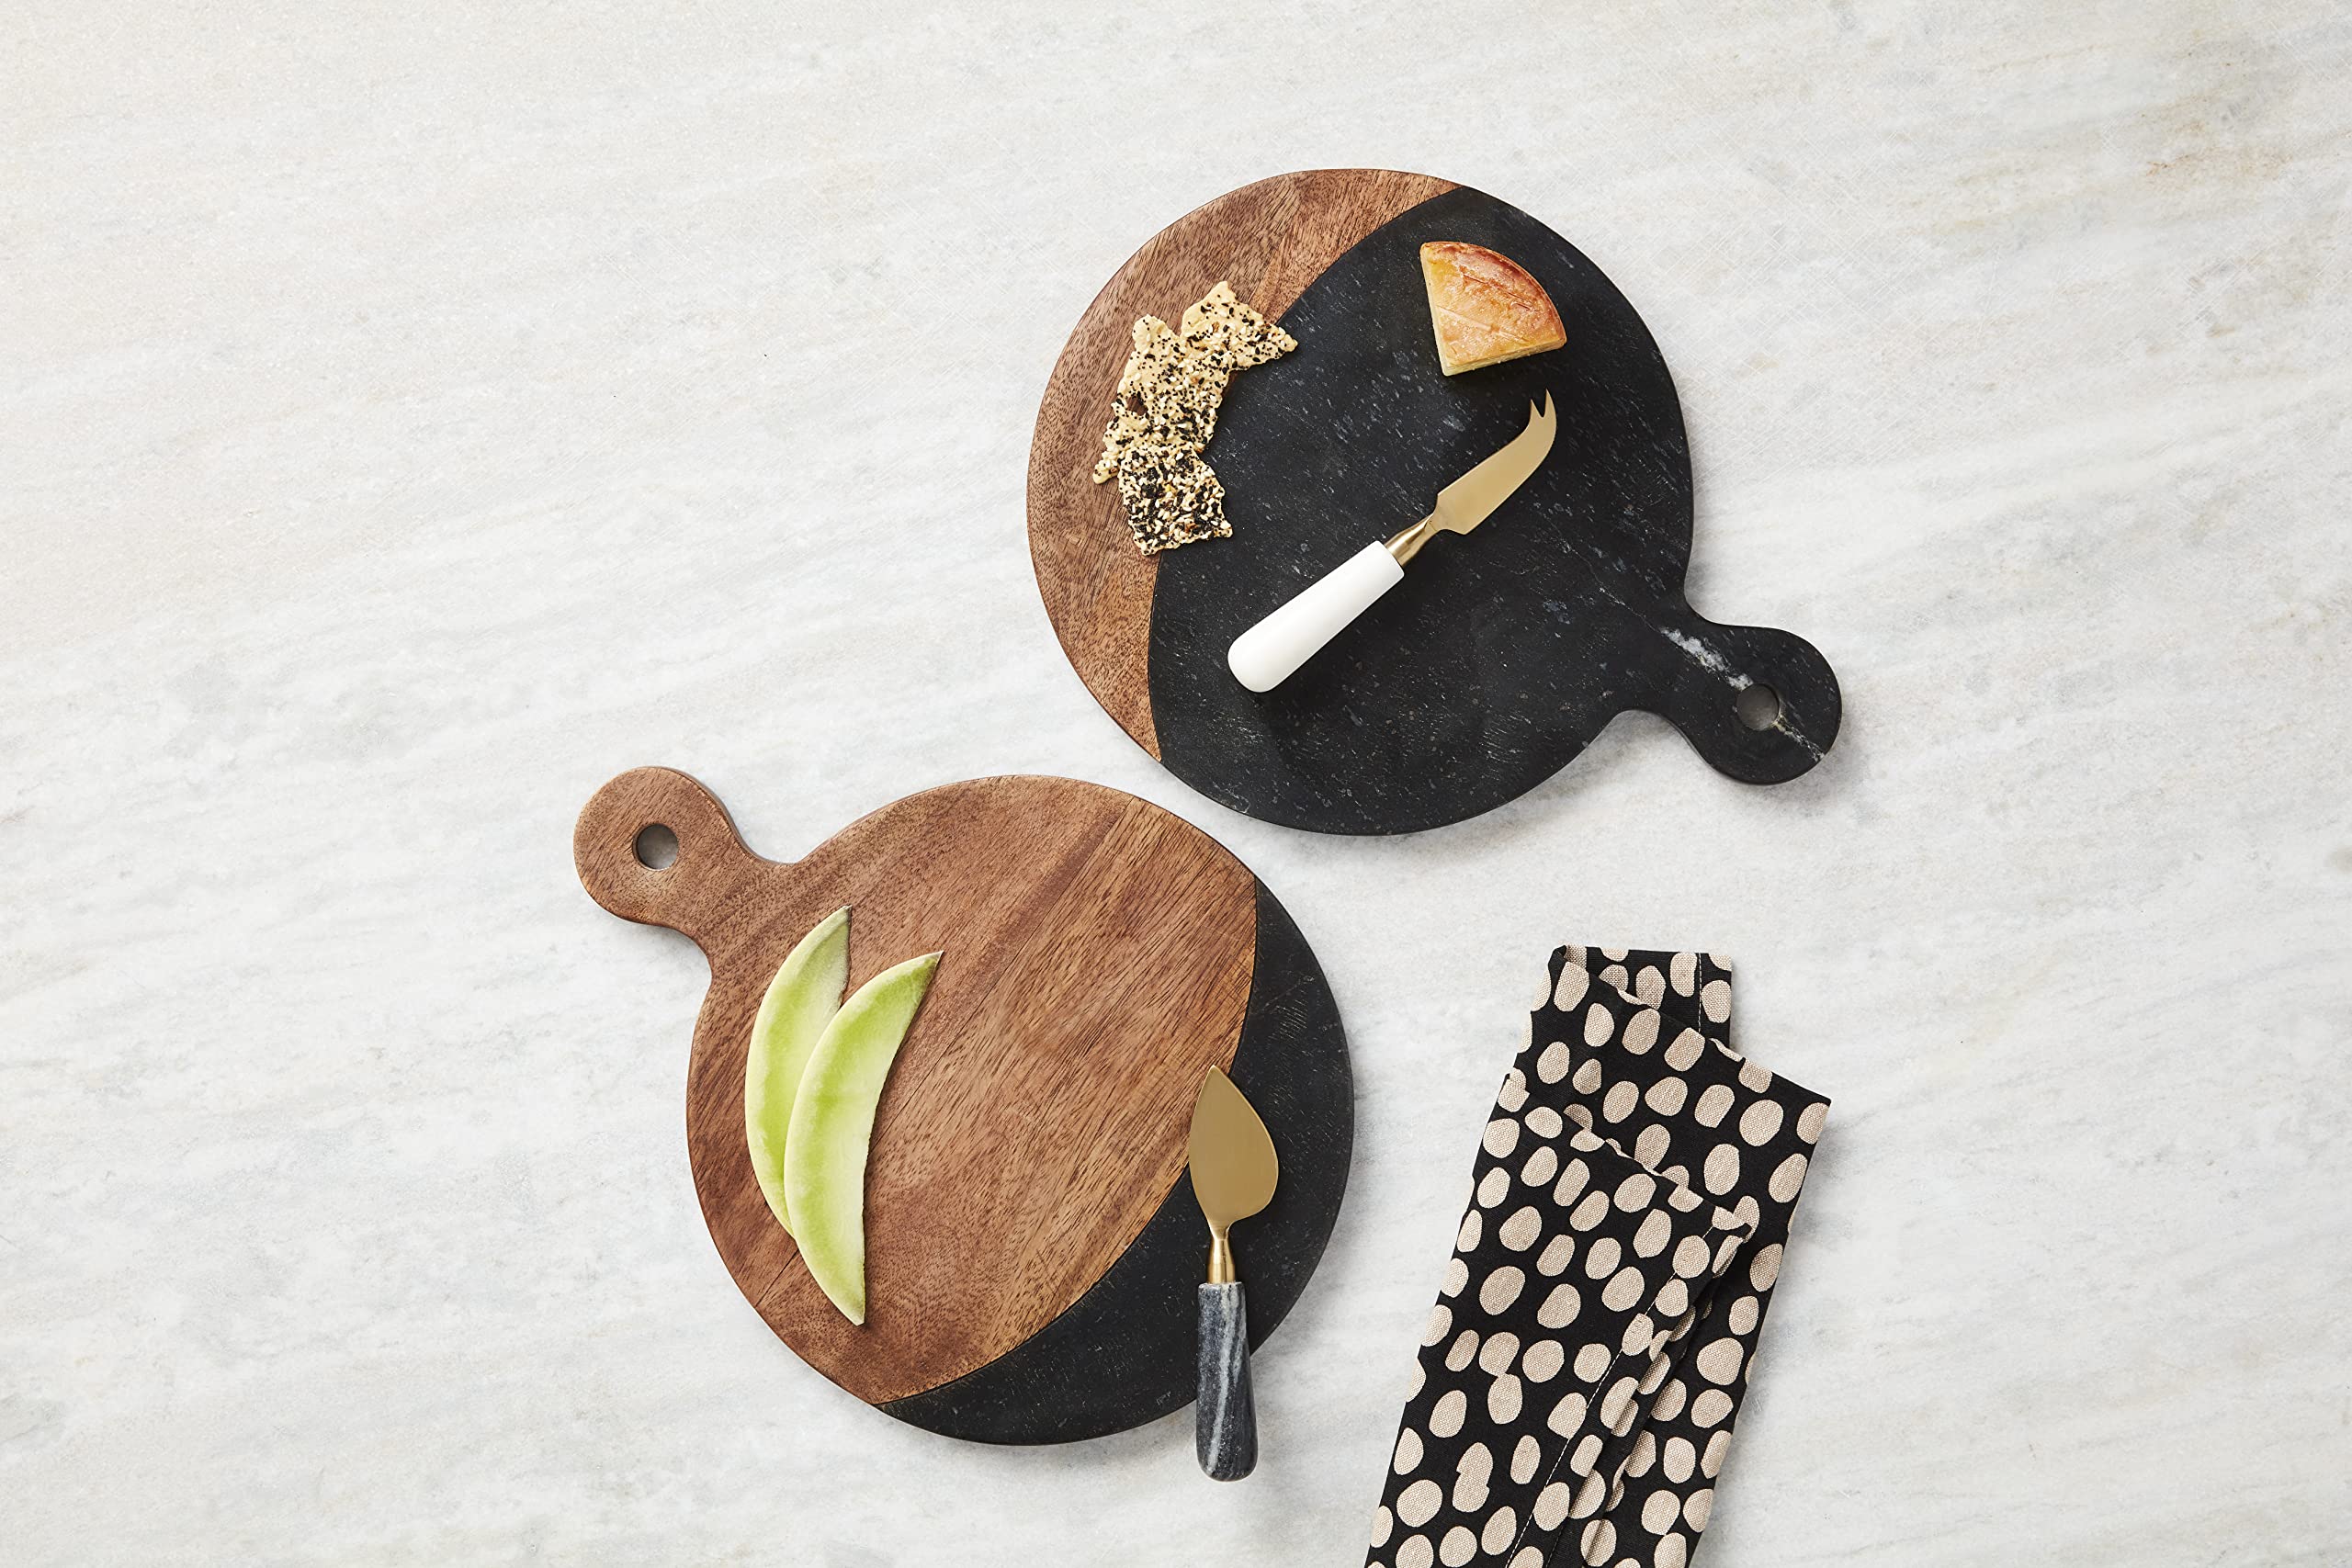 Mud Pie Blk Marble And Wood Board Set, Board 13 3/4" X 10 1/2" Dia | Utensil Approx 5 1/2"